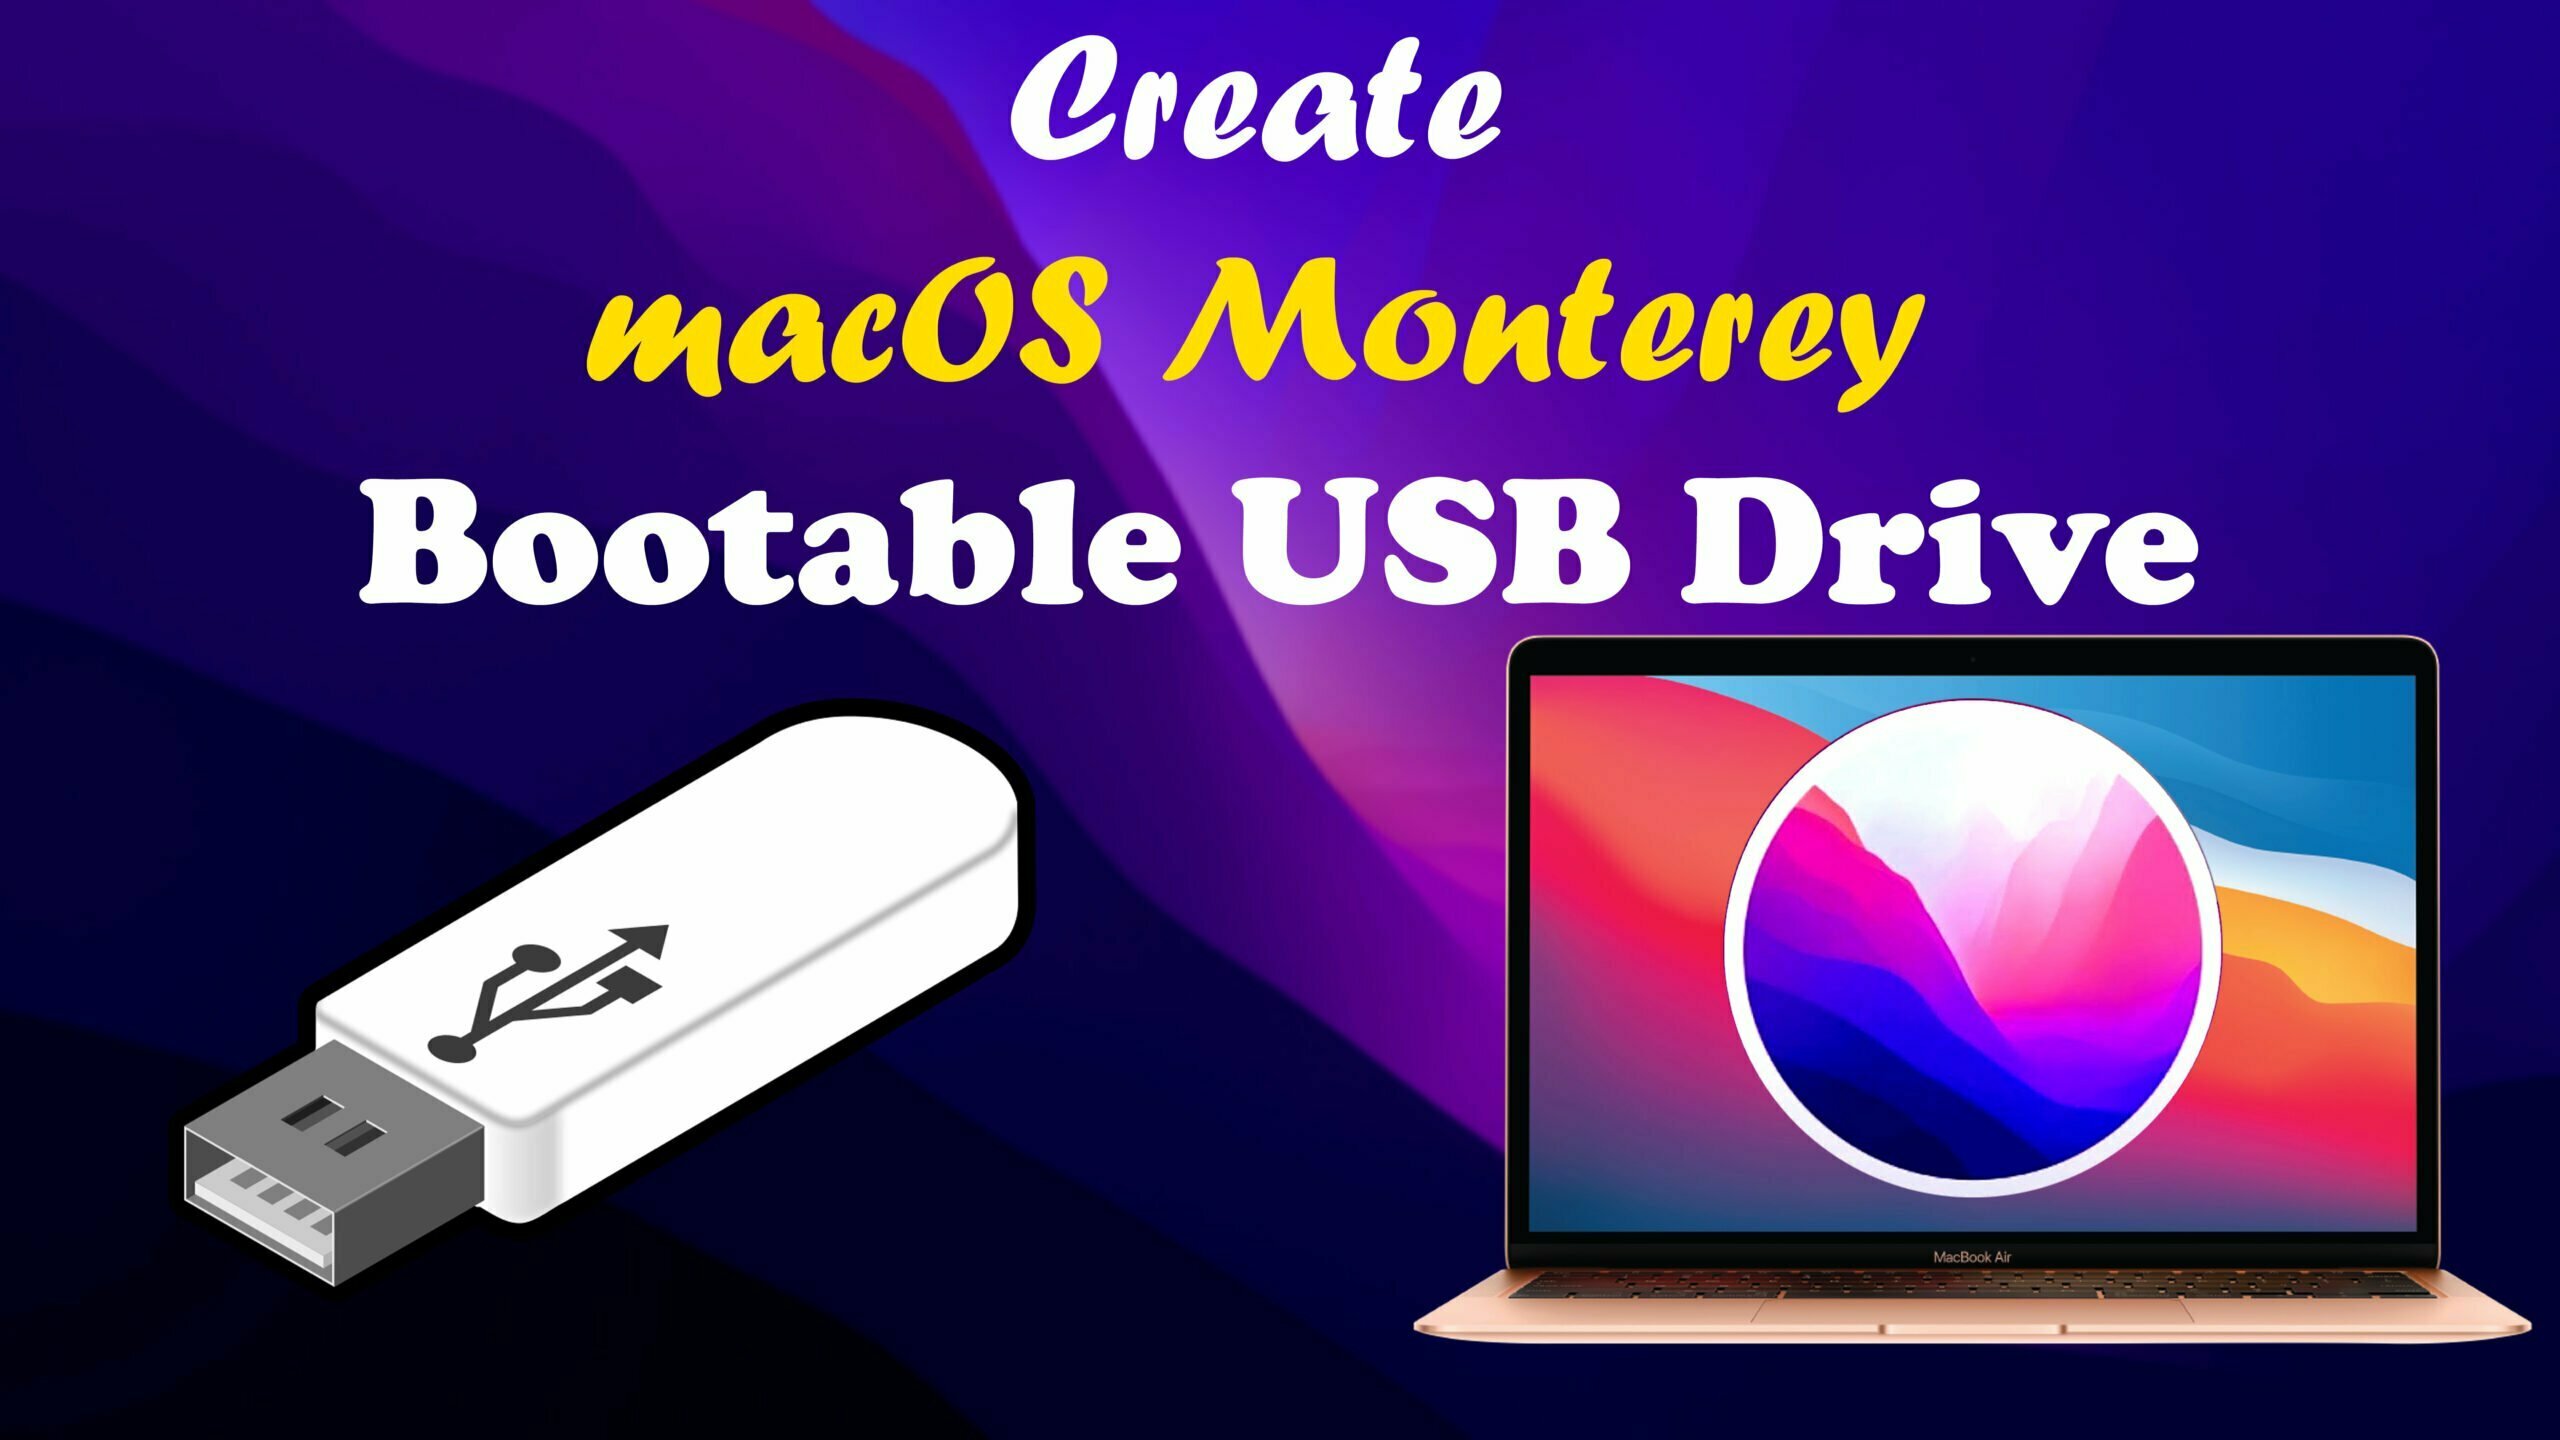 How to Create macOS Monterey Bootable USB Drive on Mac?